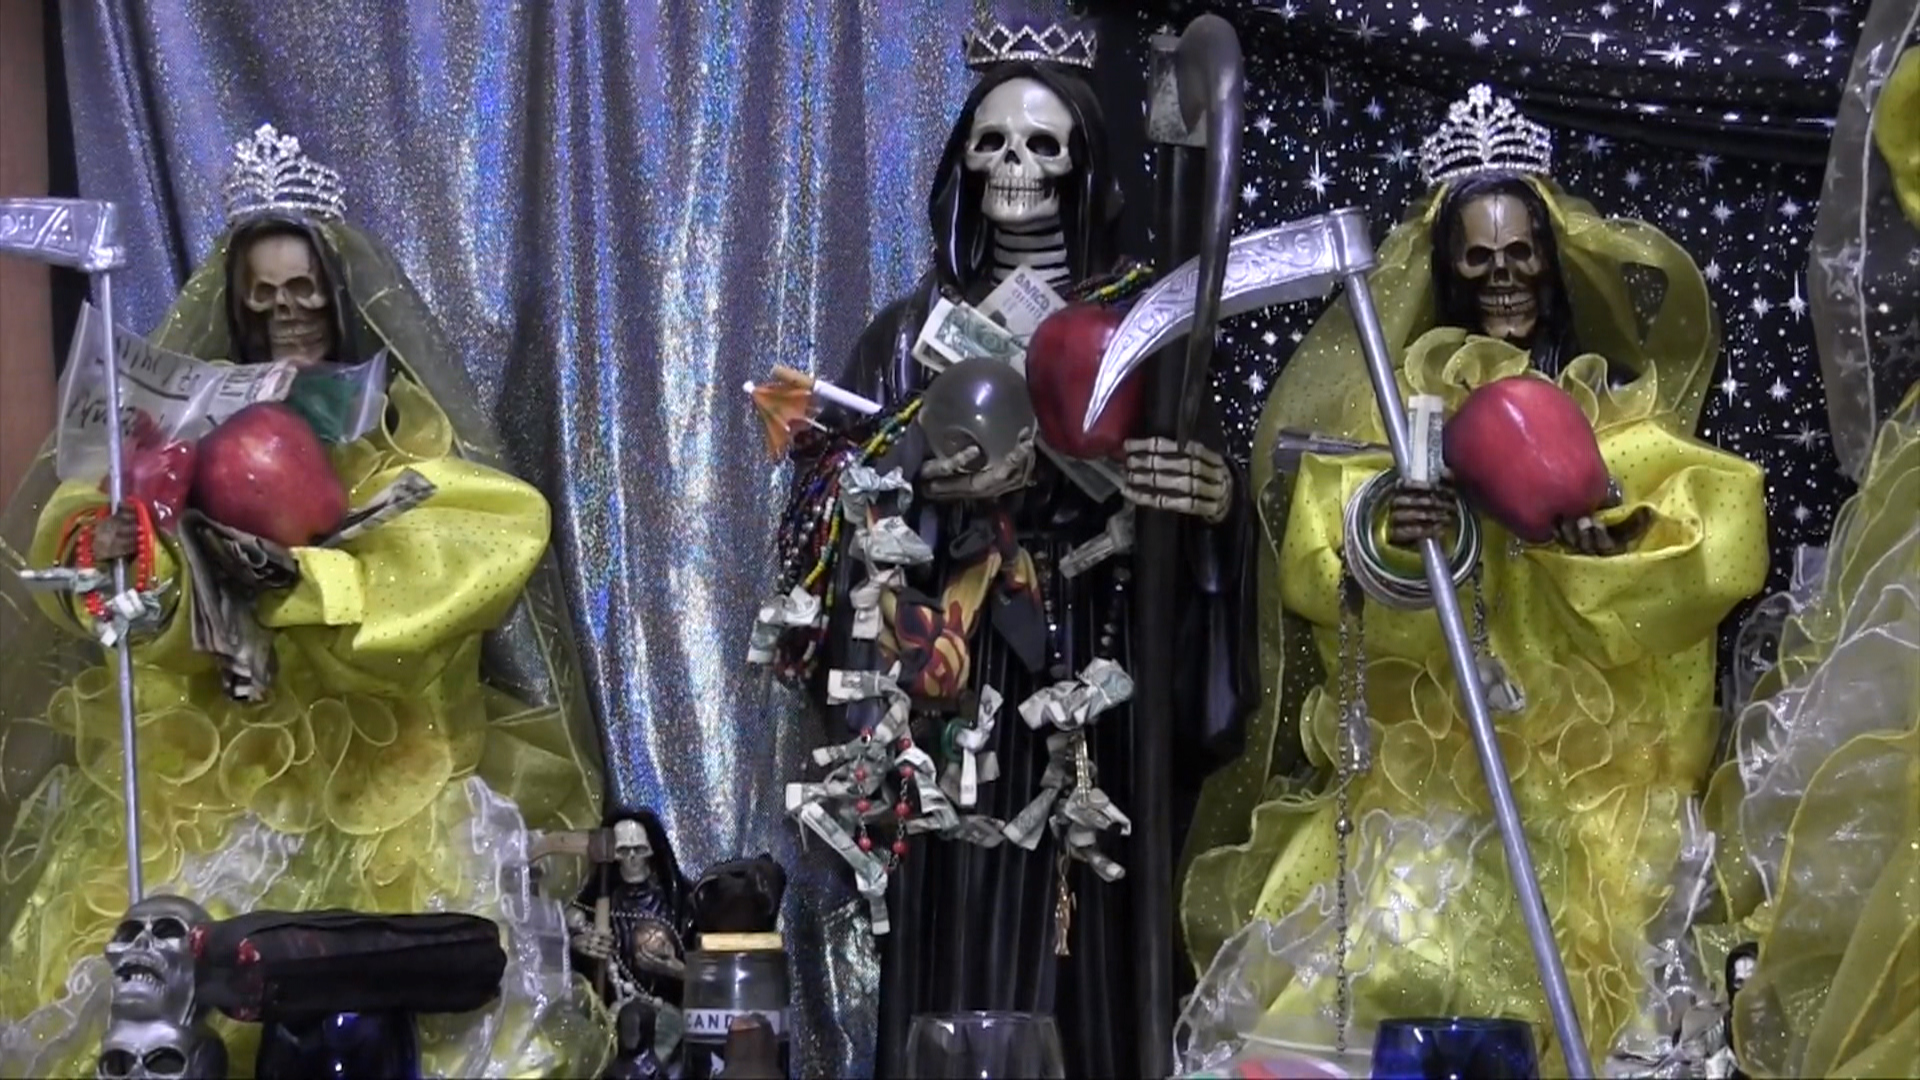 Santa Muerte Devotees Say She Is A Force For Good